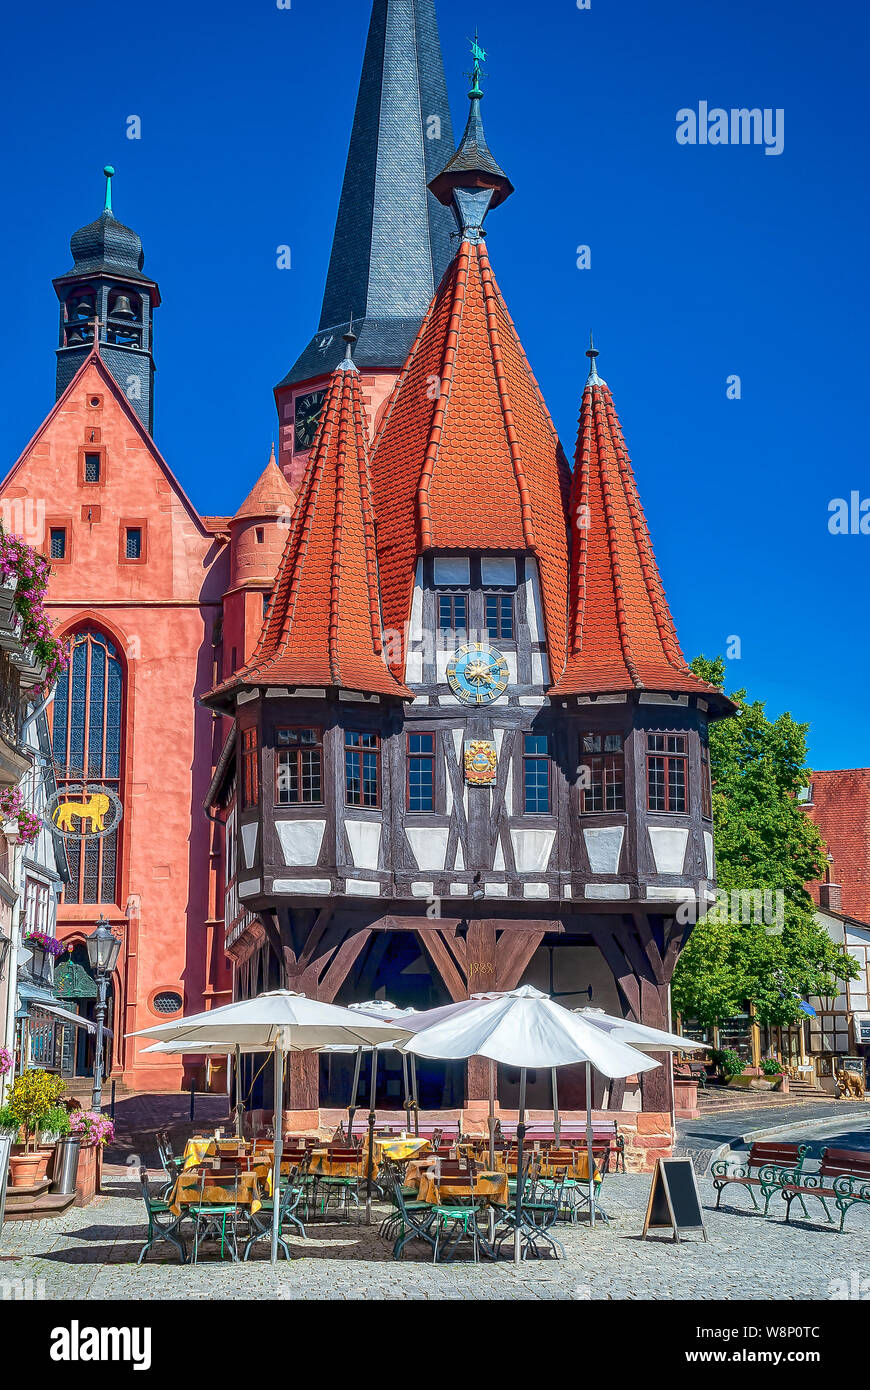 Old town hall at Michelbach, Hesse, Germany Stock Photo